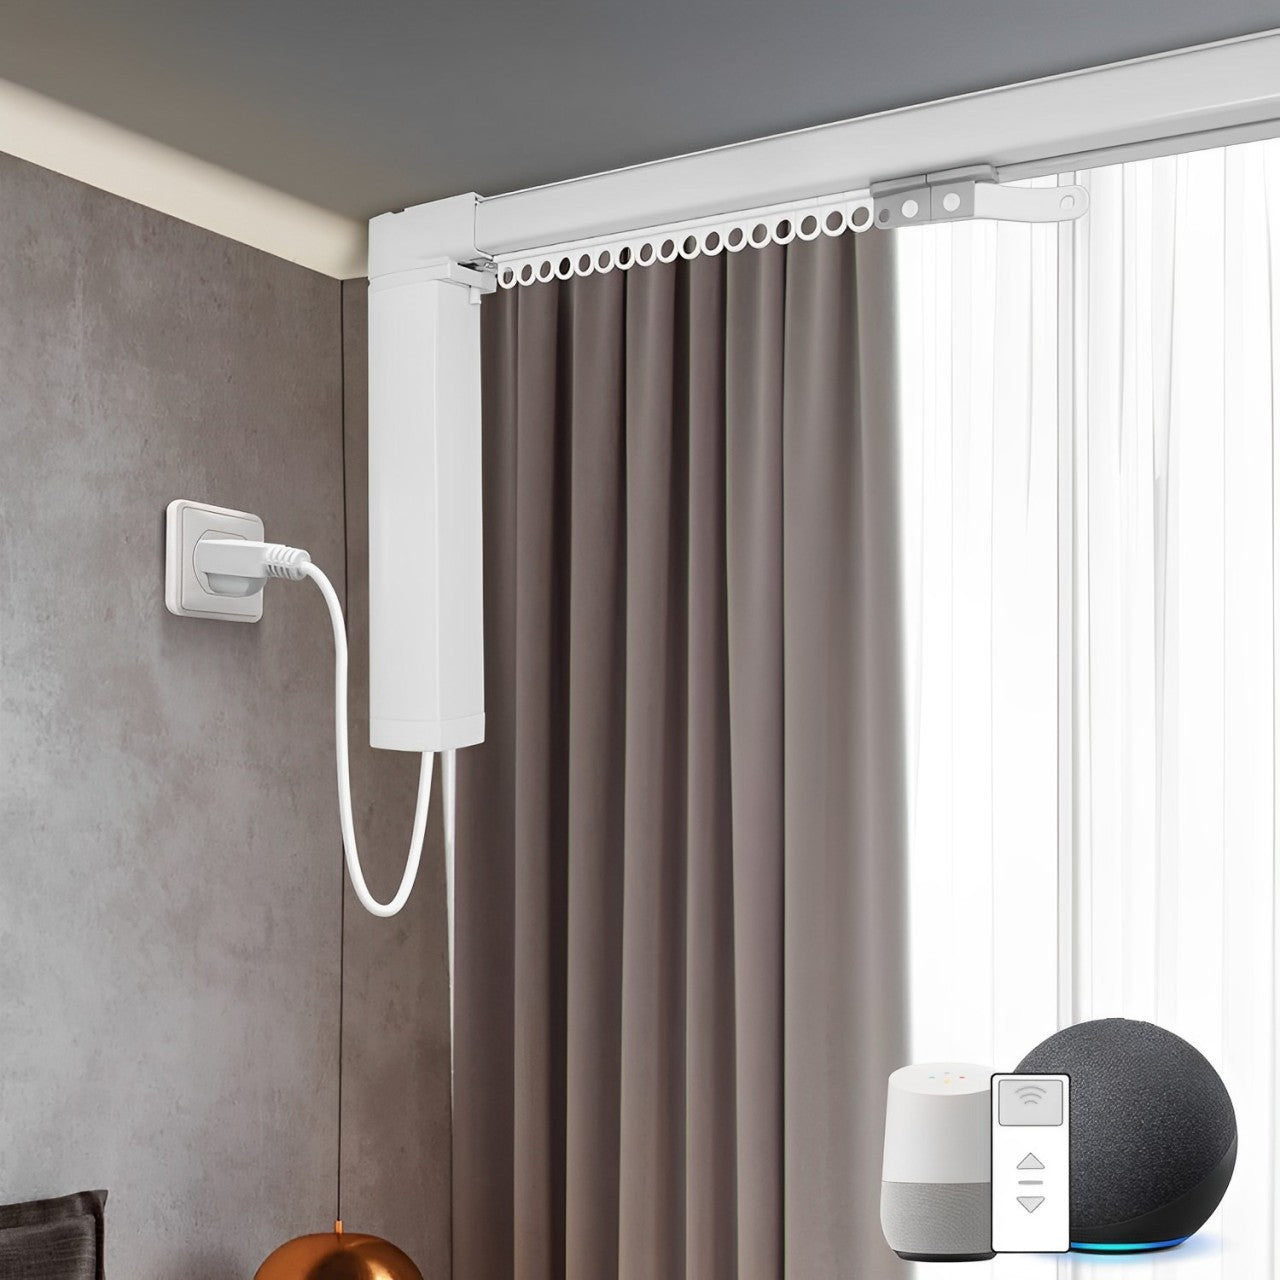 Motorized curtain track system for oversized windows, featuring gray drapes and automated control with smart home integration, showcasing silent operation and effortless control as described for DOOYA motorized system